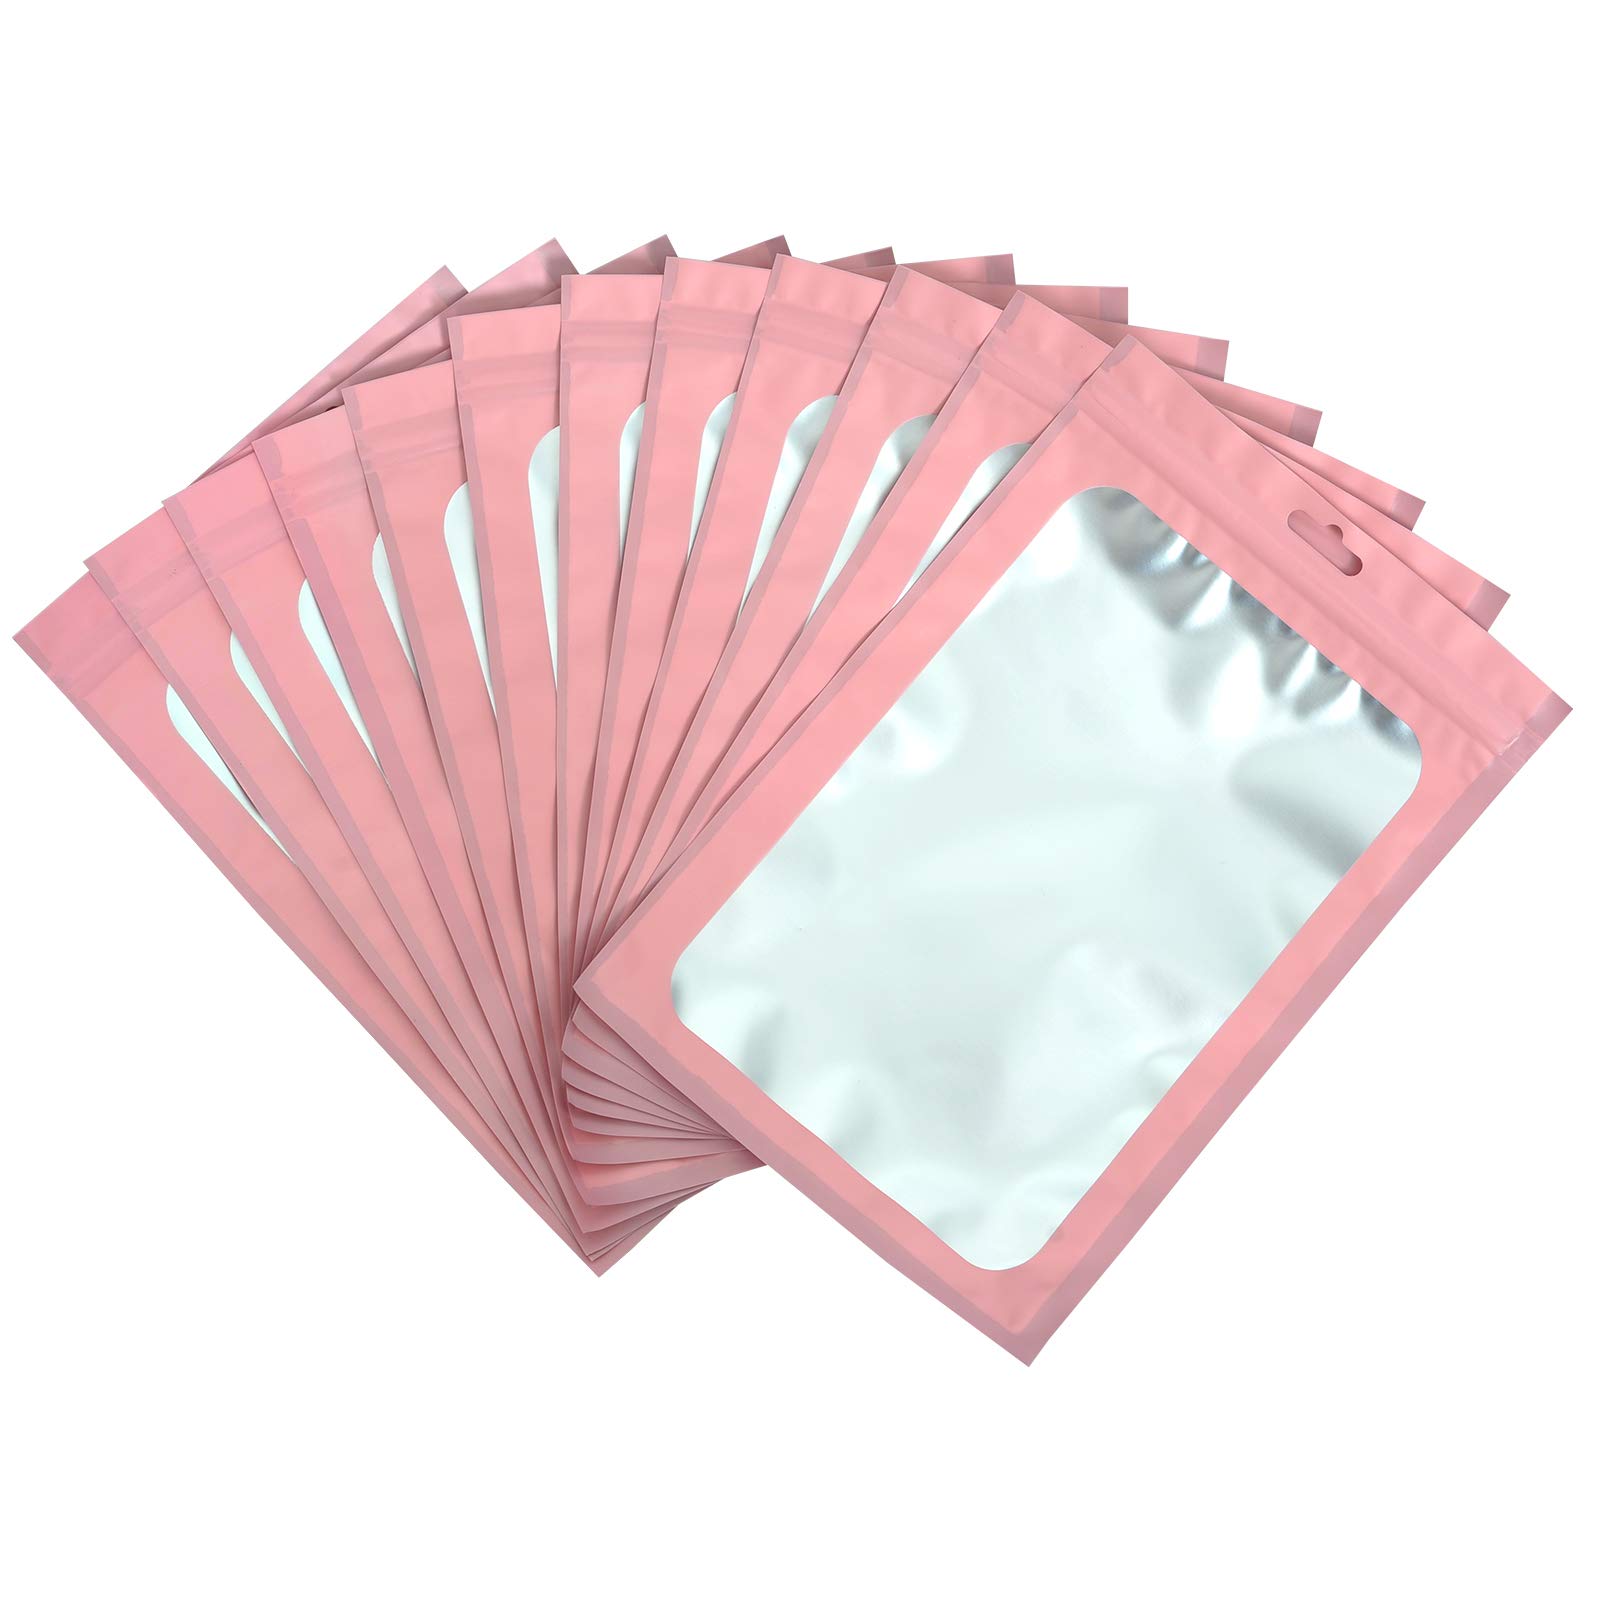 100-pack mylar packaging bags for small business sample bag smell proof  resealable zipper pouch bags jewelry food Lip gloss eyelash phone case